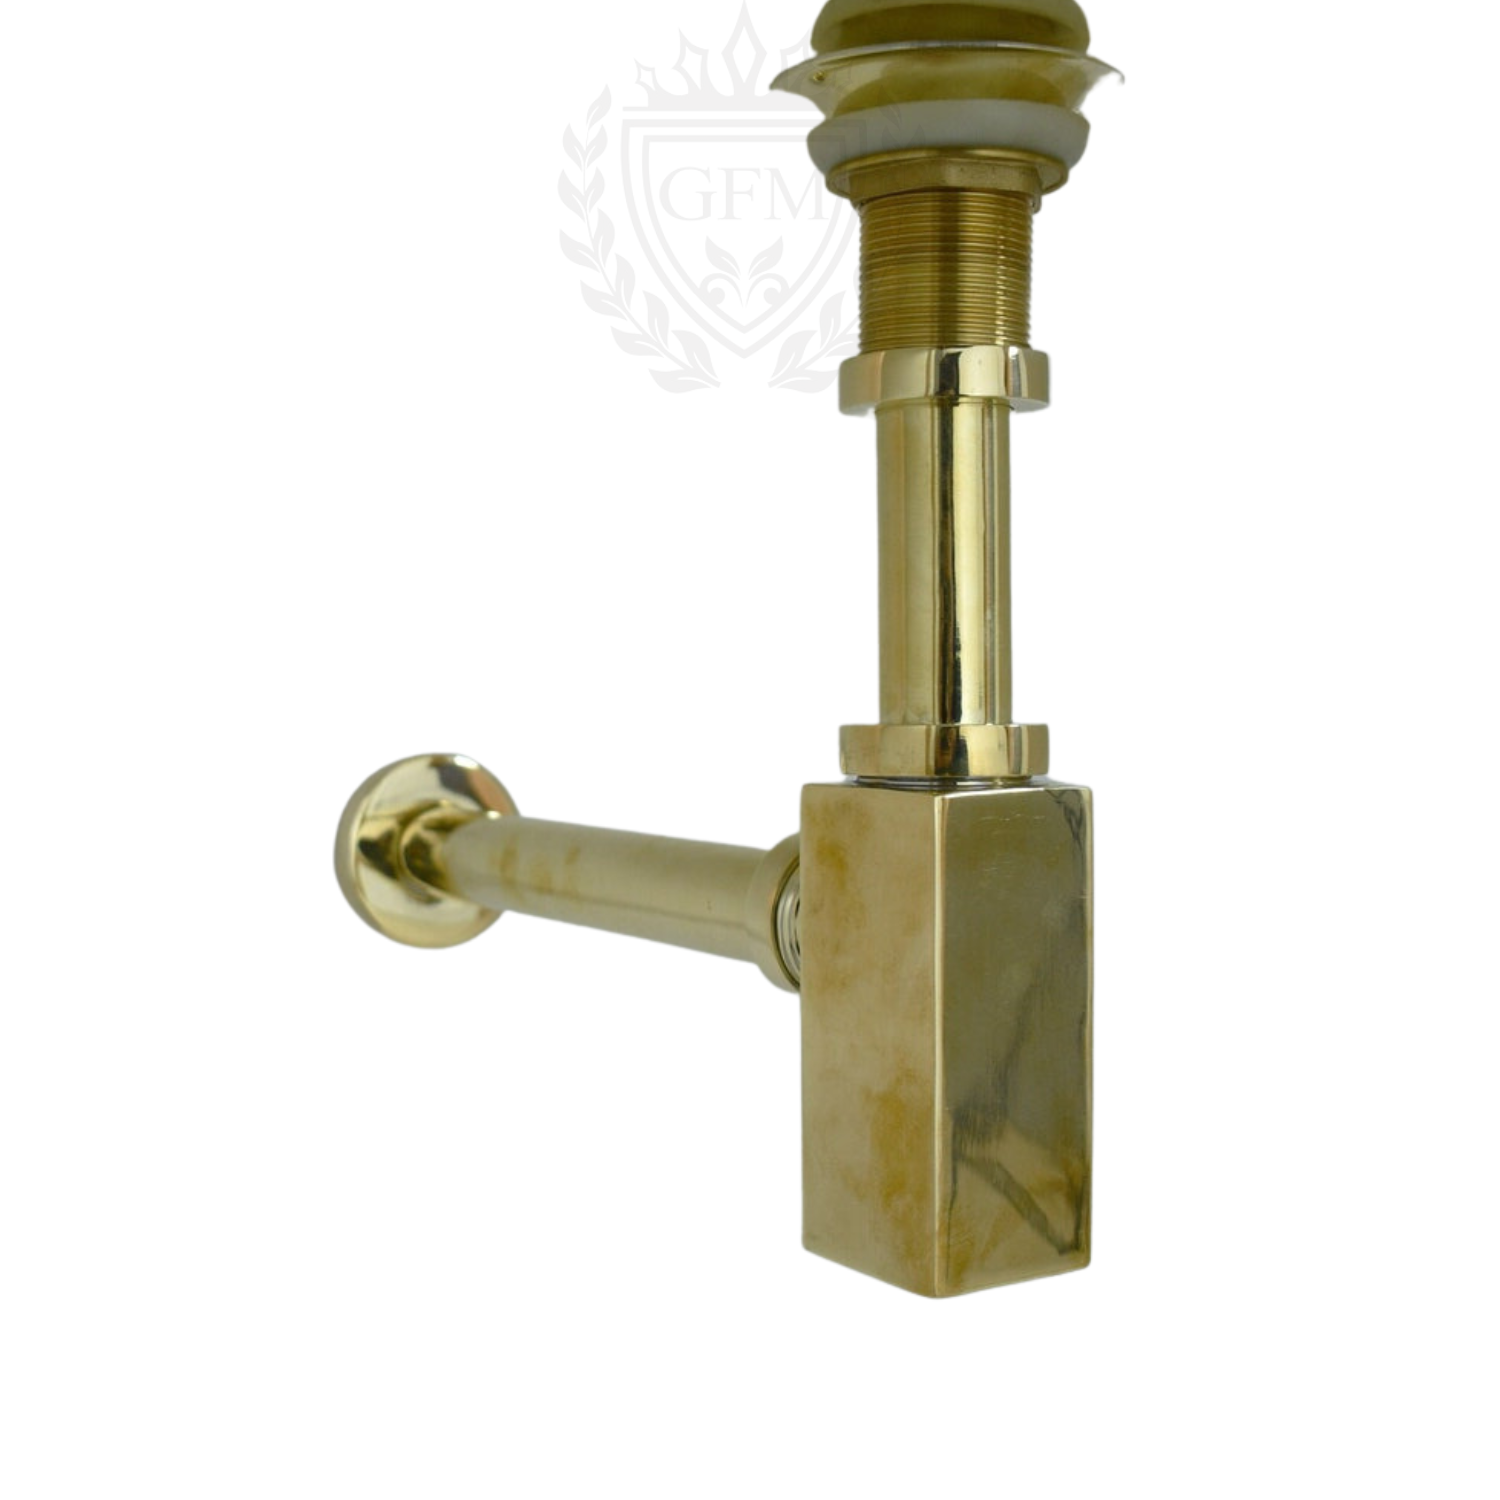 Solid Unlacquered Brass P-Trap and Sink Stopper - Handmade Push-Up Button Drain